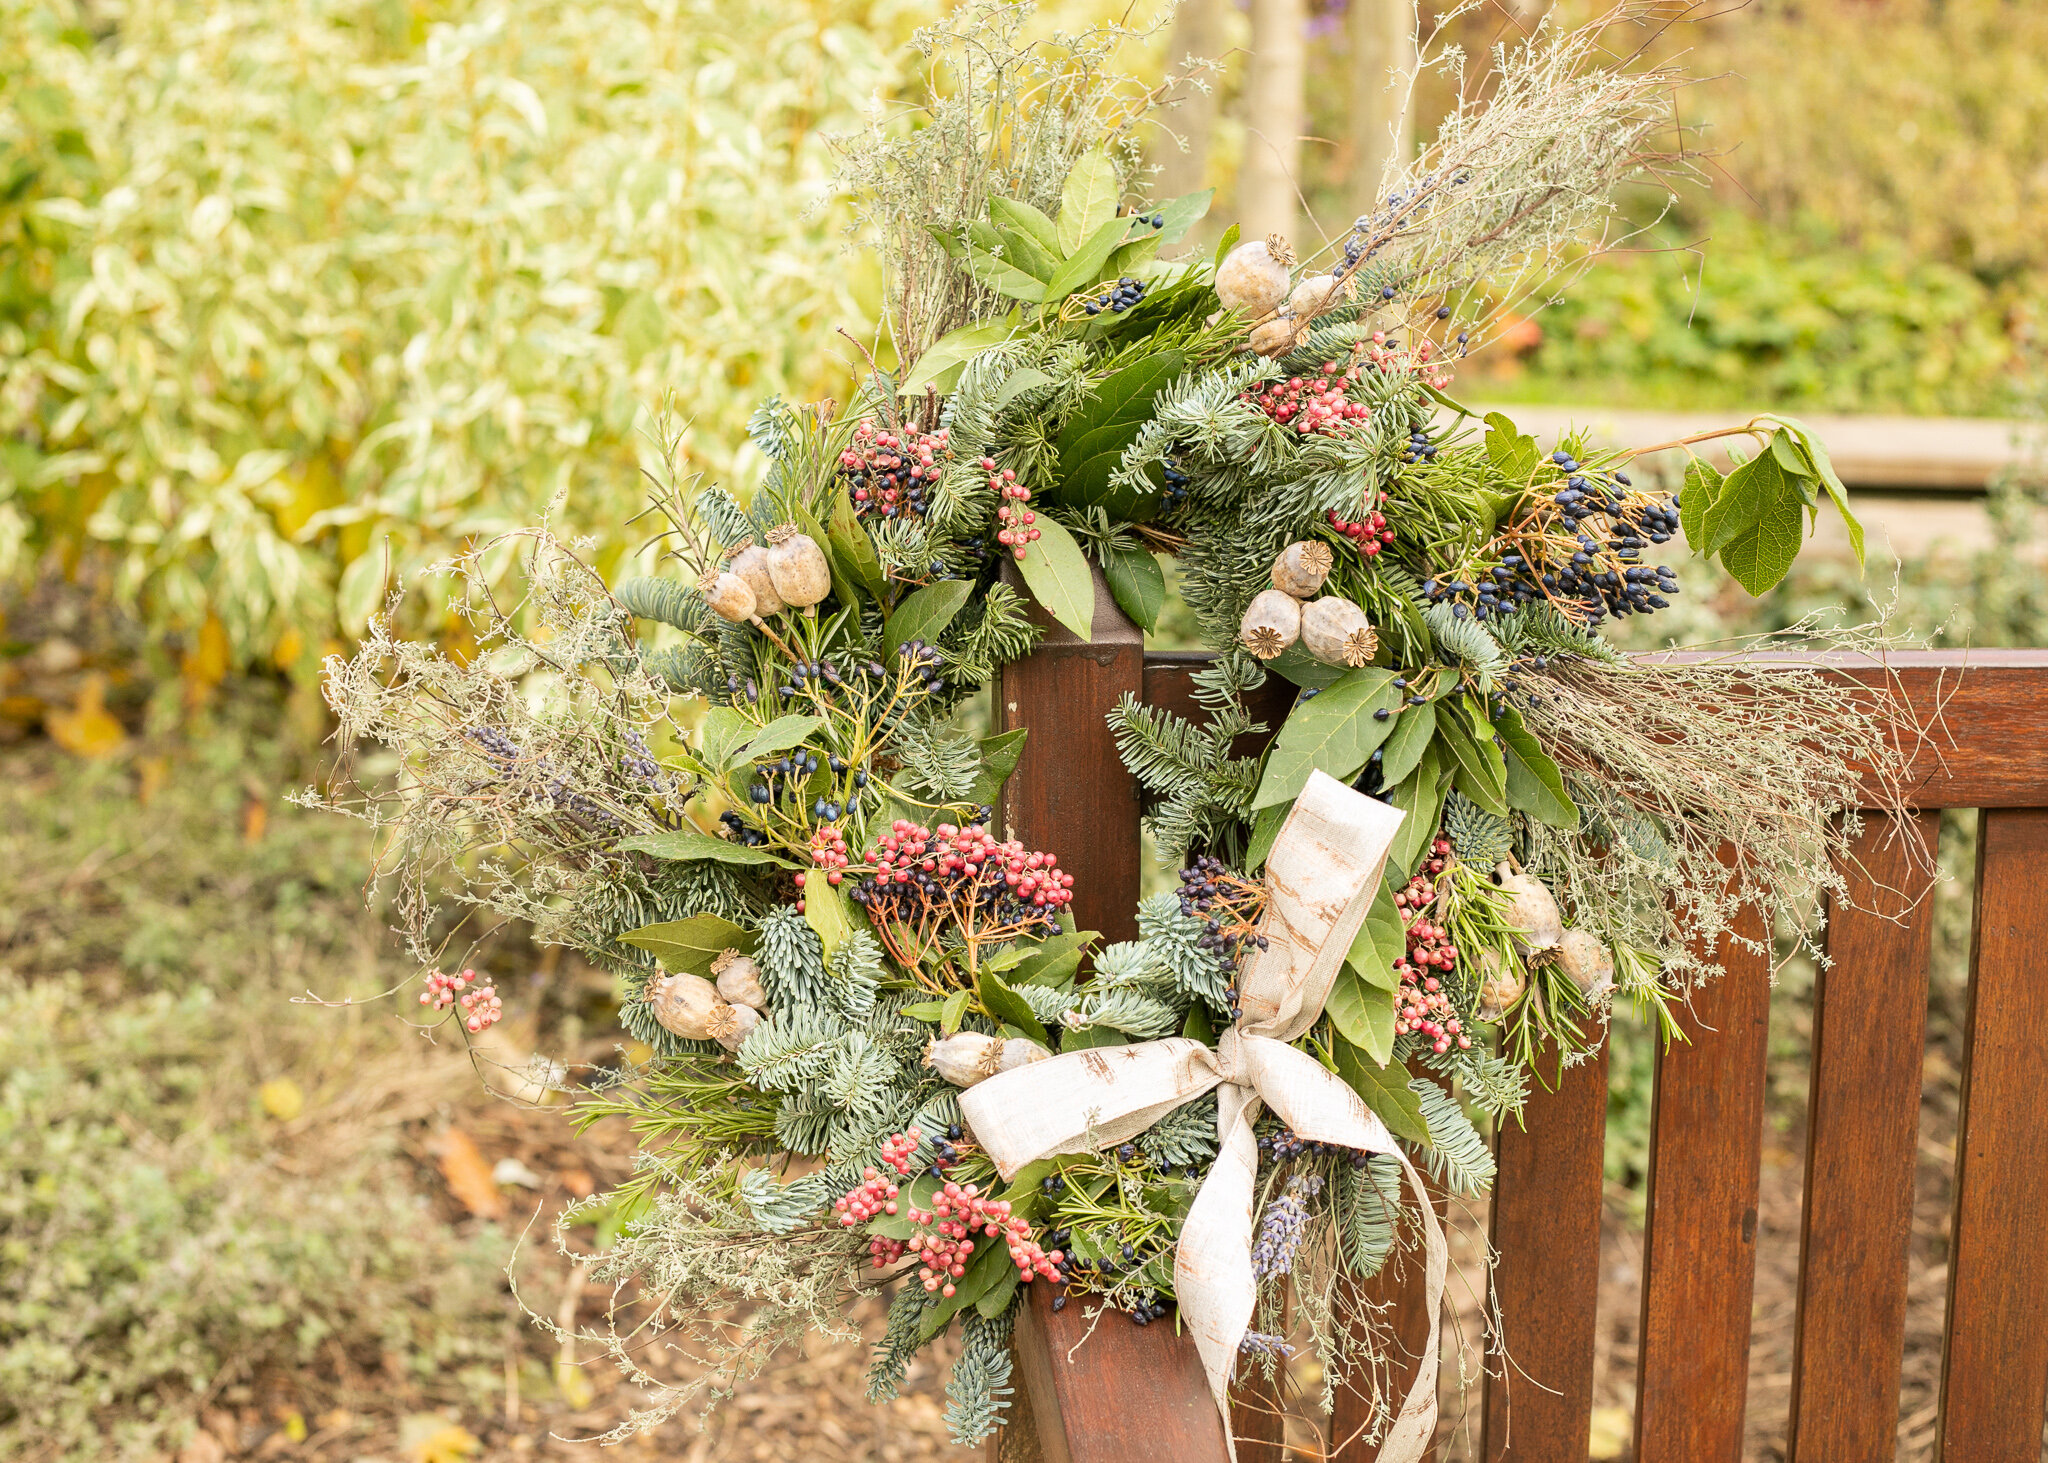 “The Wilder wreath” by Clementine Moon. Photo - Claire Victoria Photography